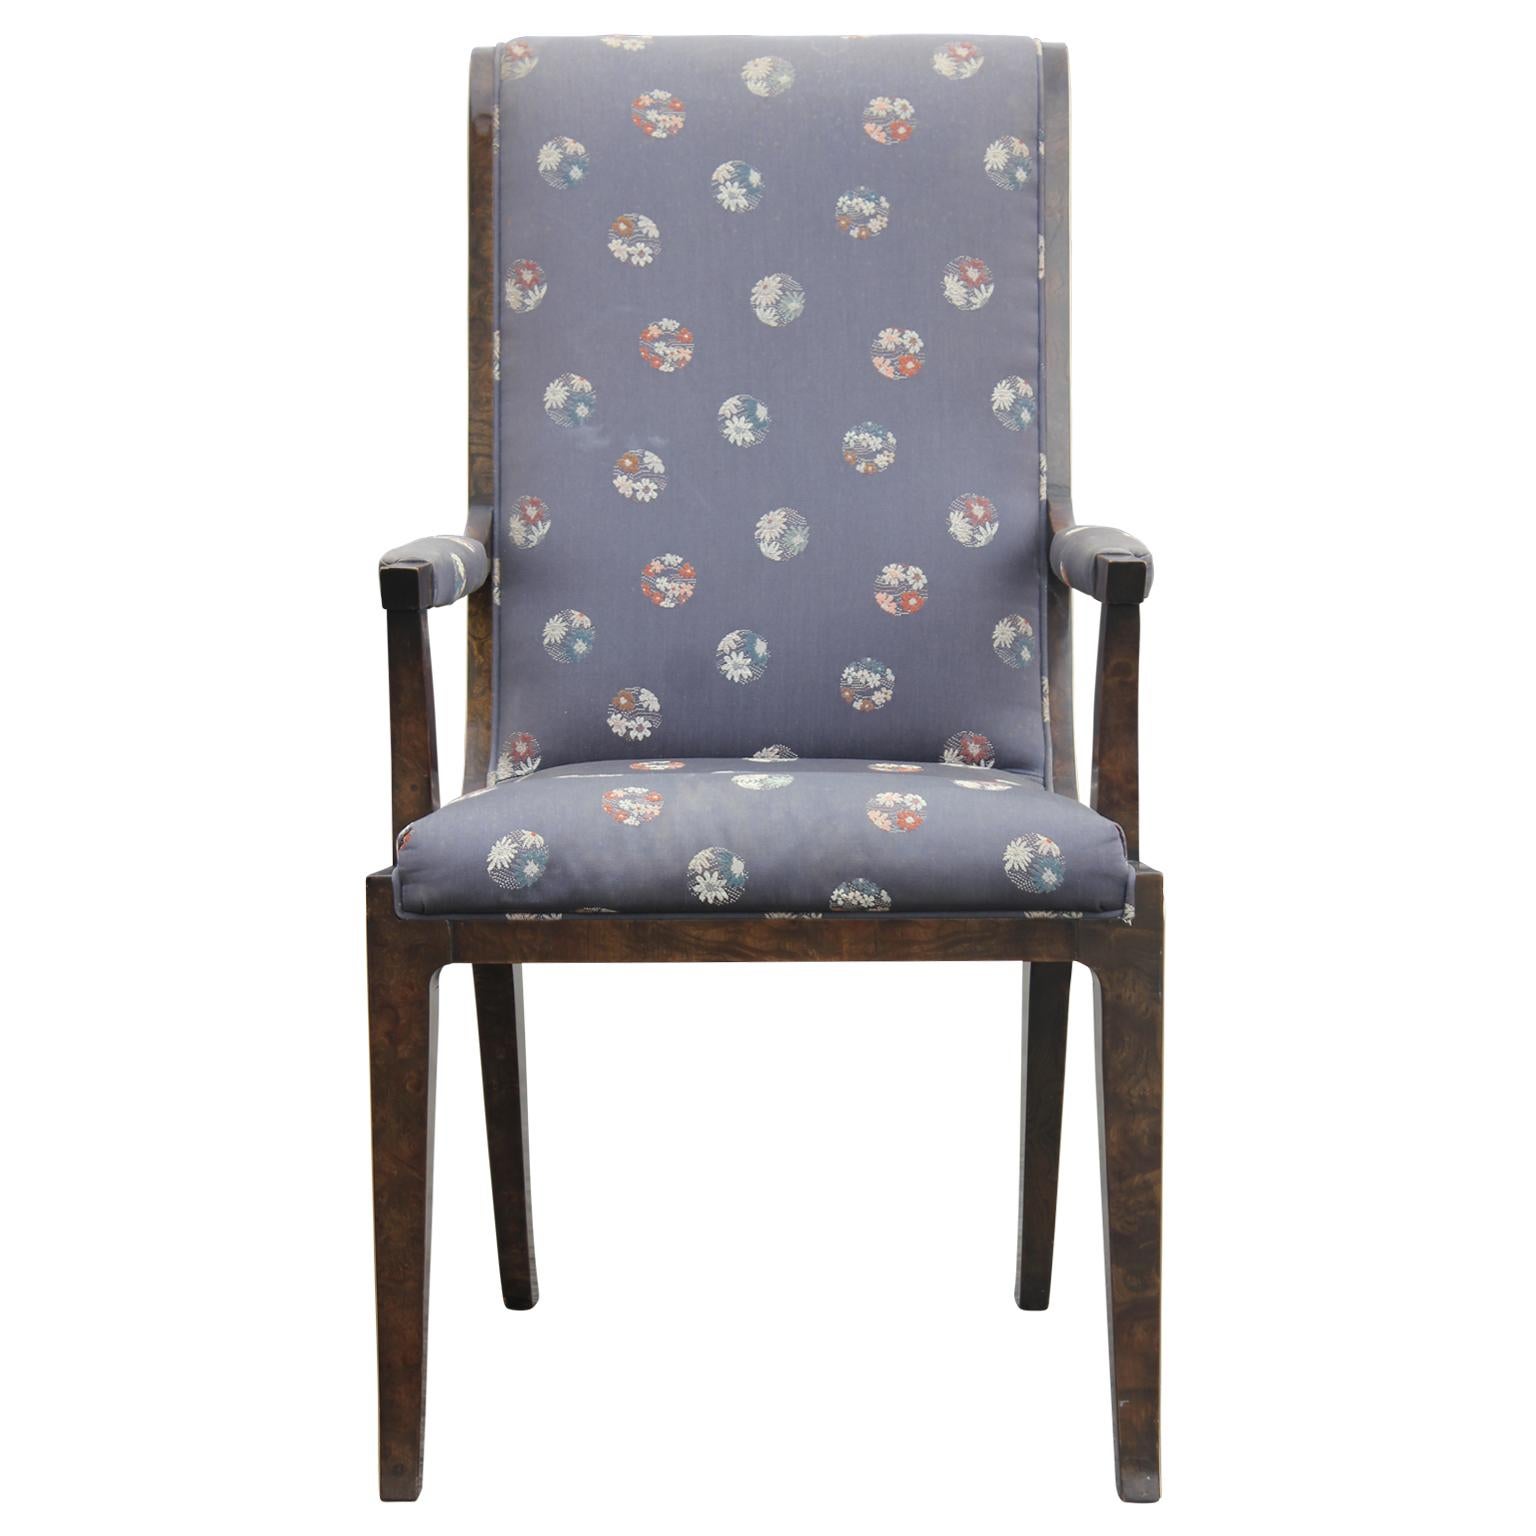 Mastercraft Hollywood Regency chairs with armrest. The pair has a blue fabric with floral circle prints. The wood is Carpathian elm. The pair of chairs is designed by William Doezema for Mastercraft.